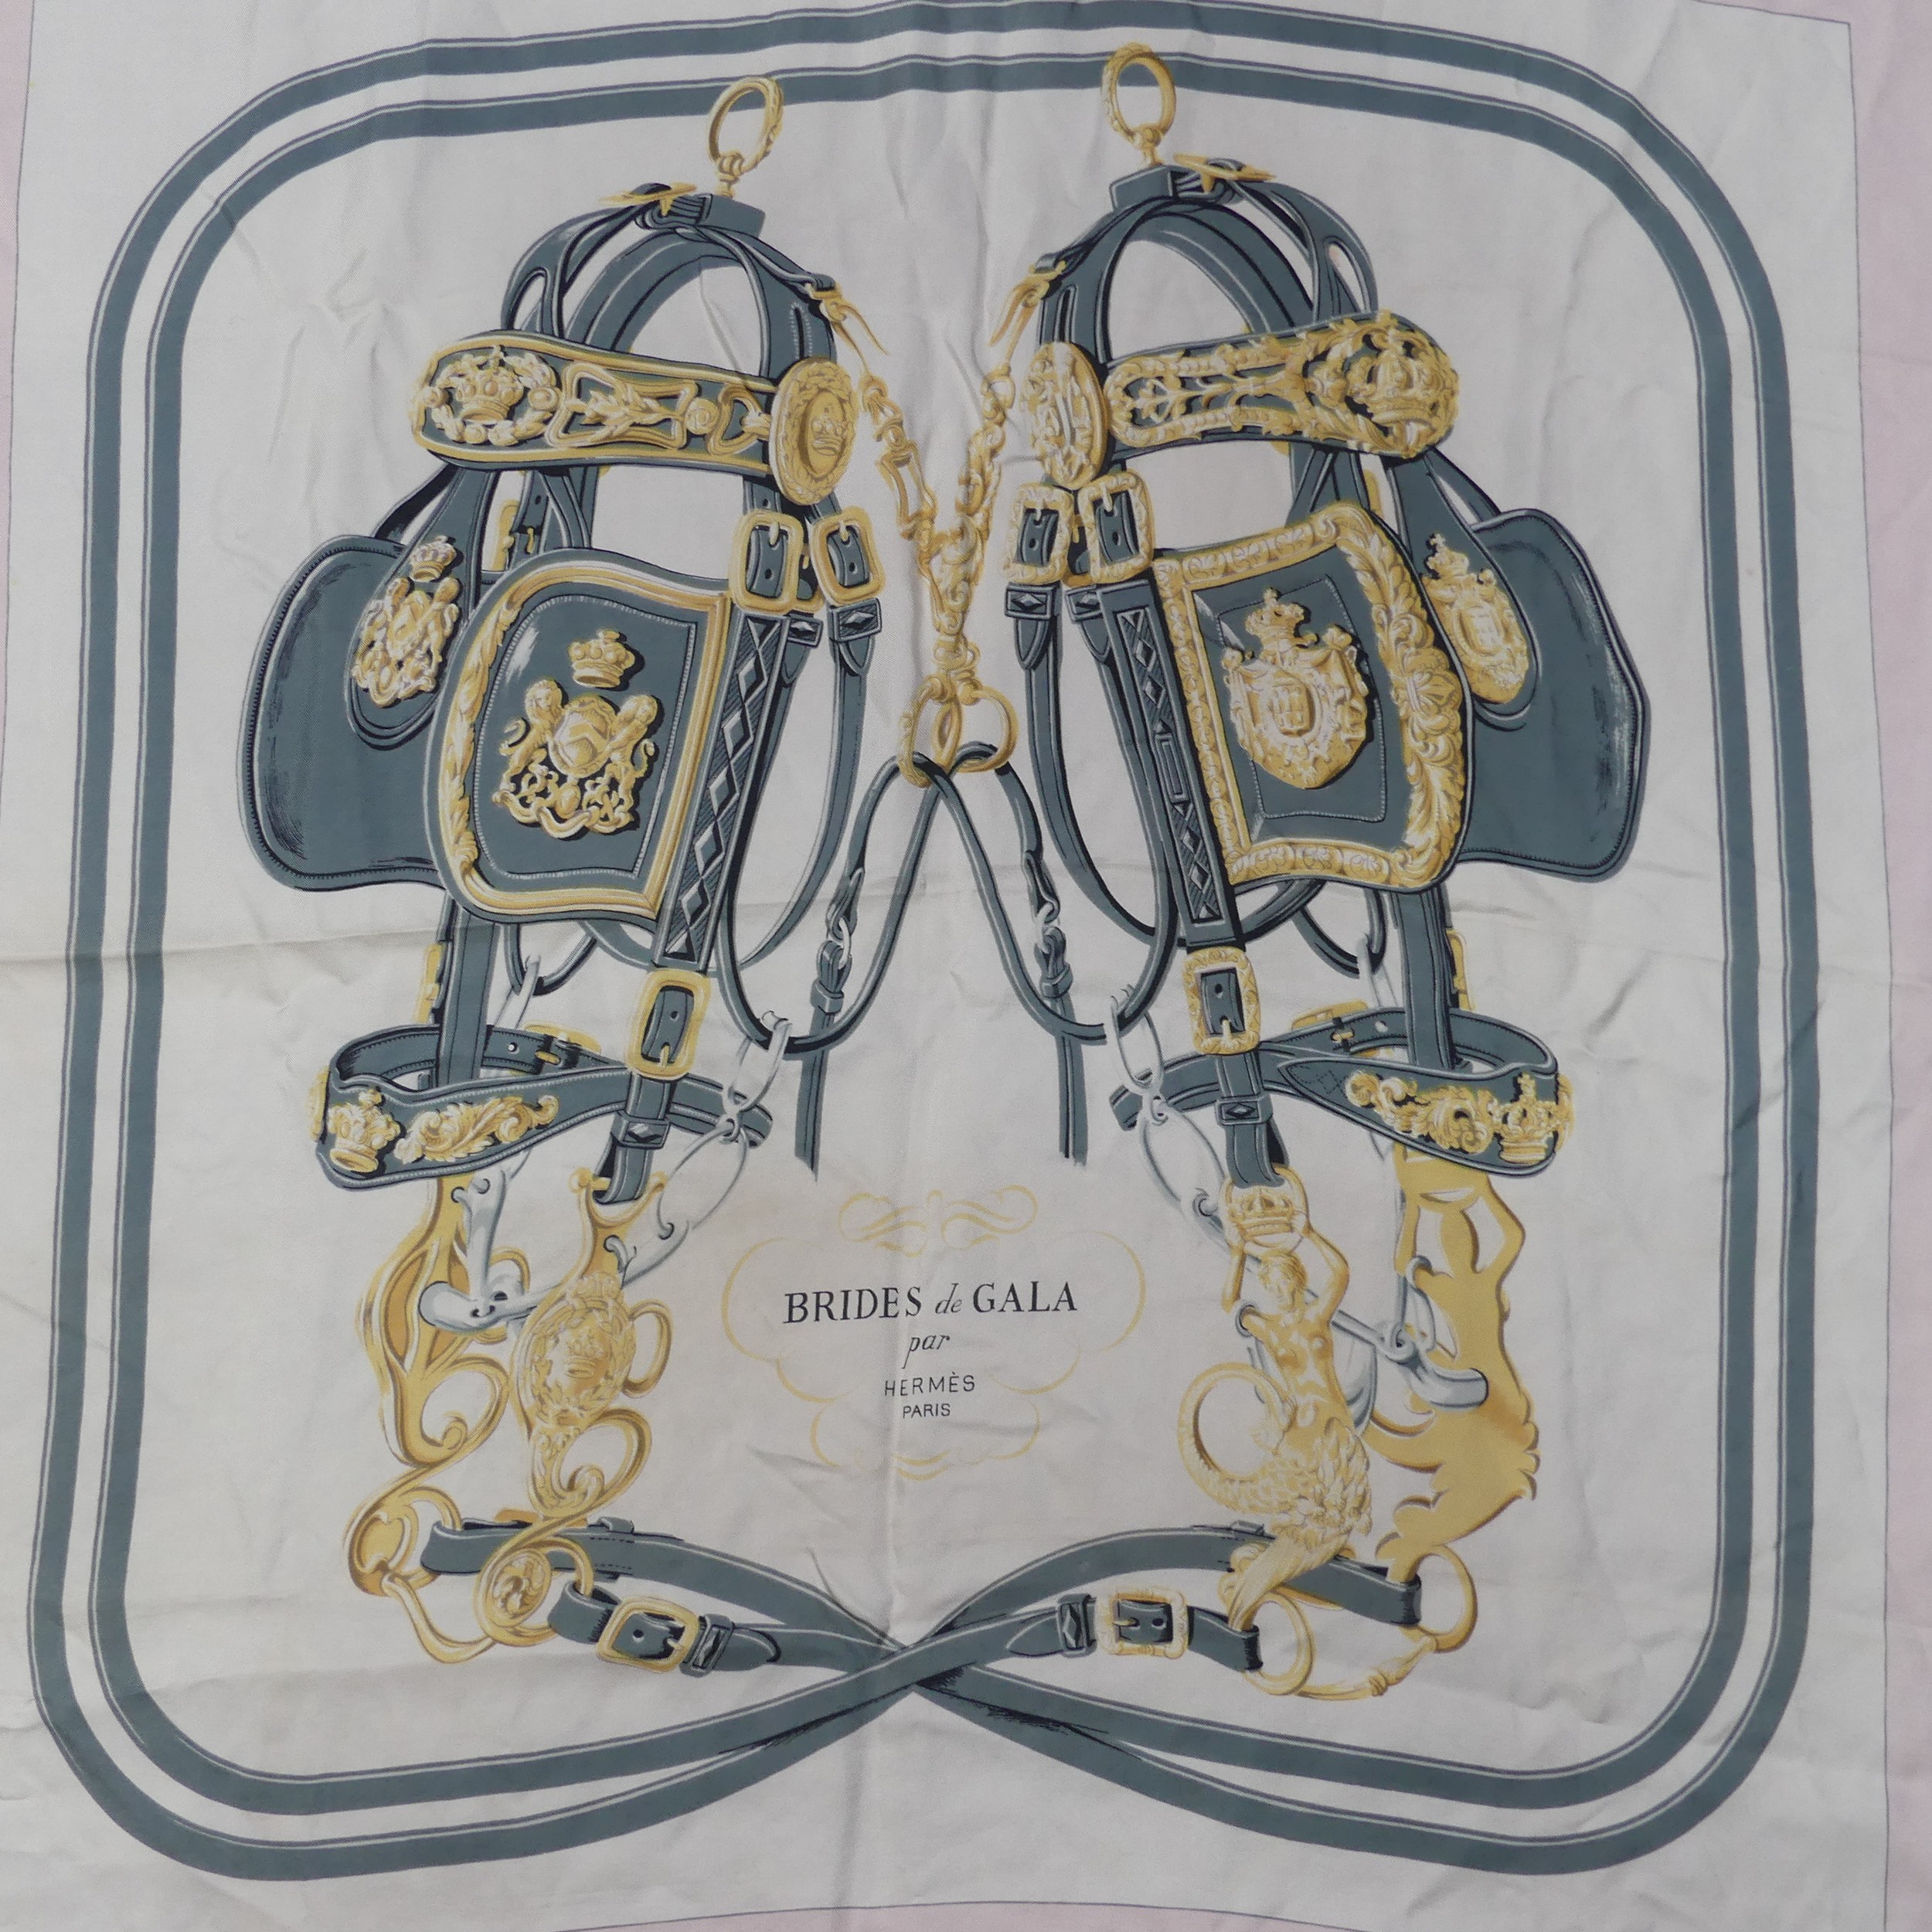 Two Hermès silk twill scarves: Carriage design blue with yellow border, and 'Brides de Gala', grey - Image 4 of 4